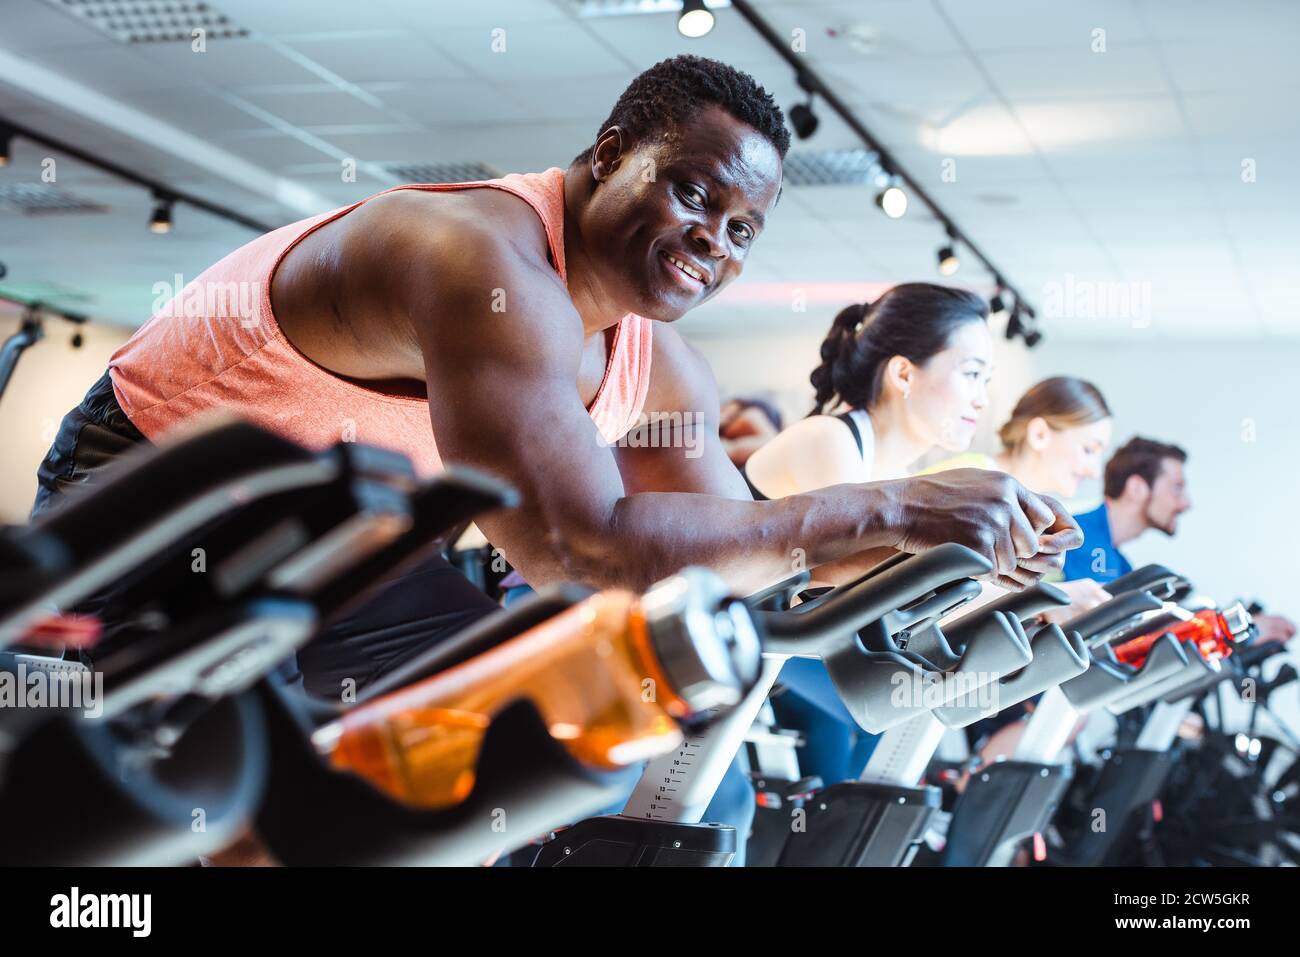 African man and friends on fitness bike in gym Stock Photo